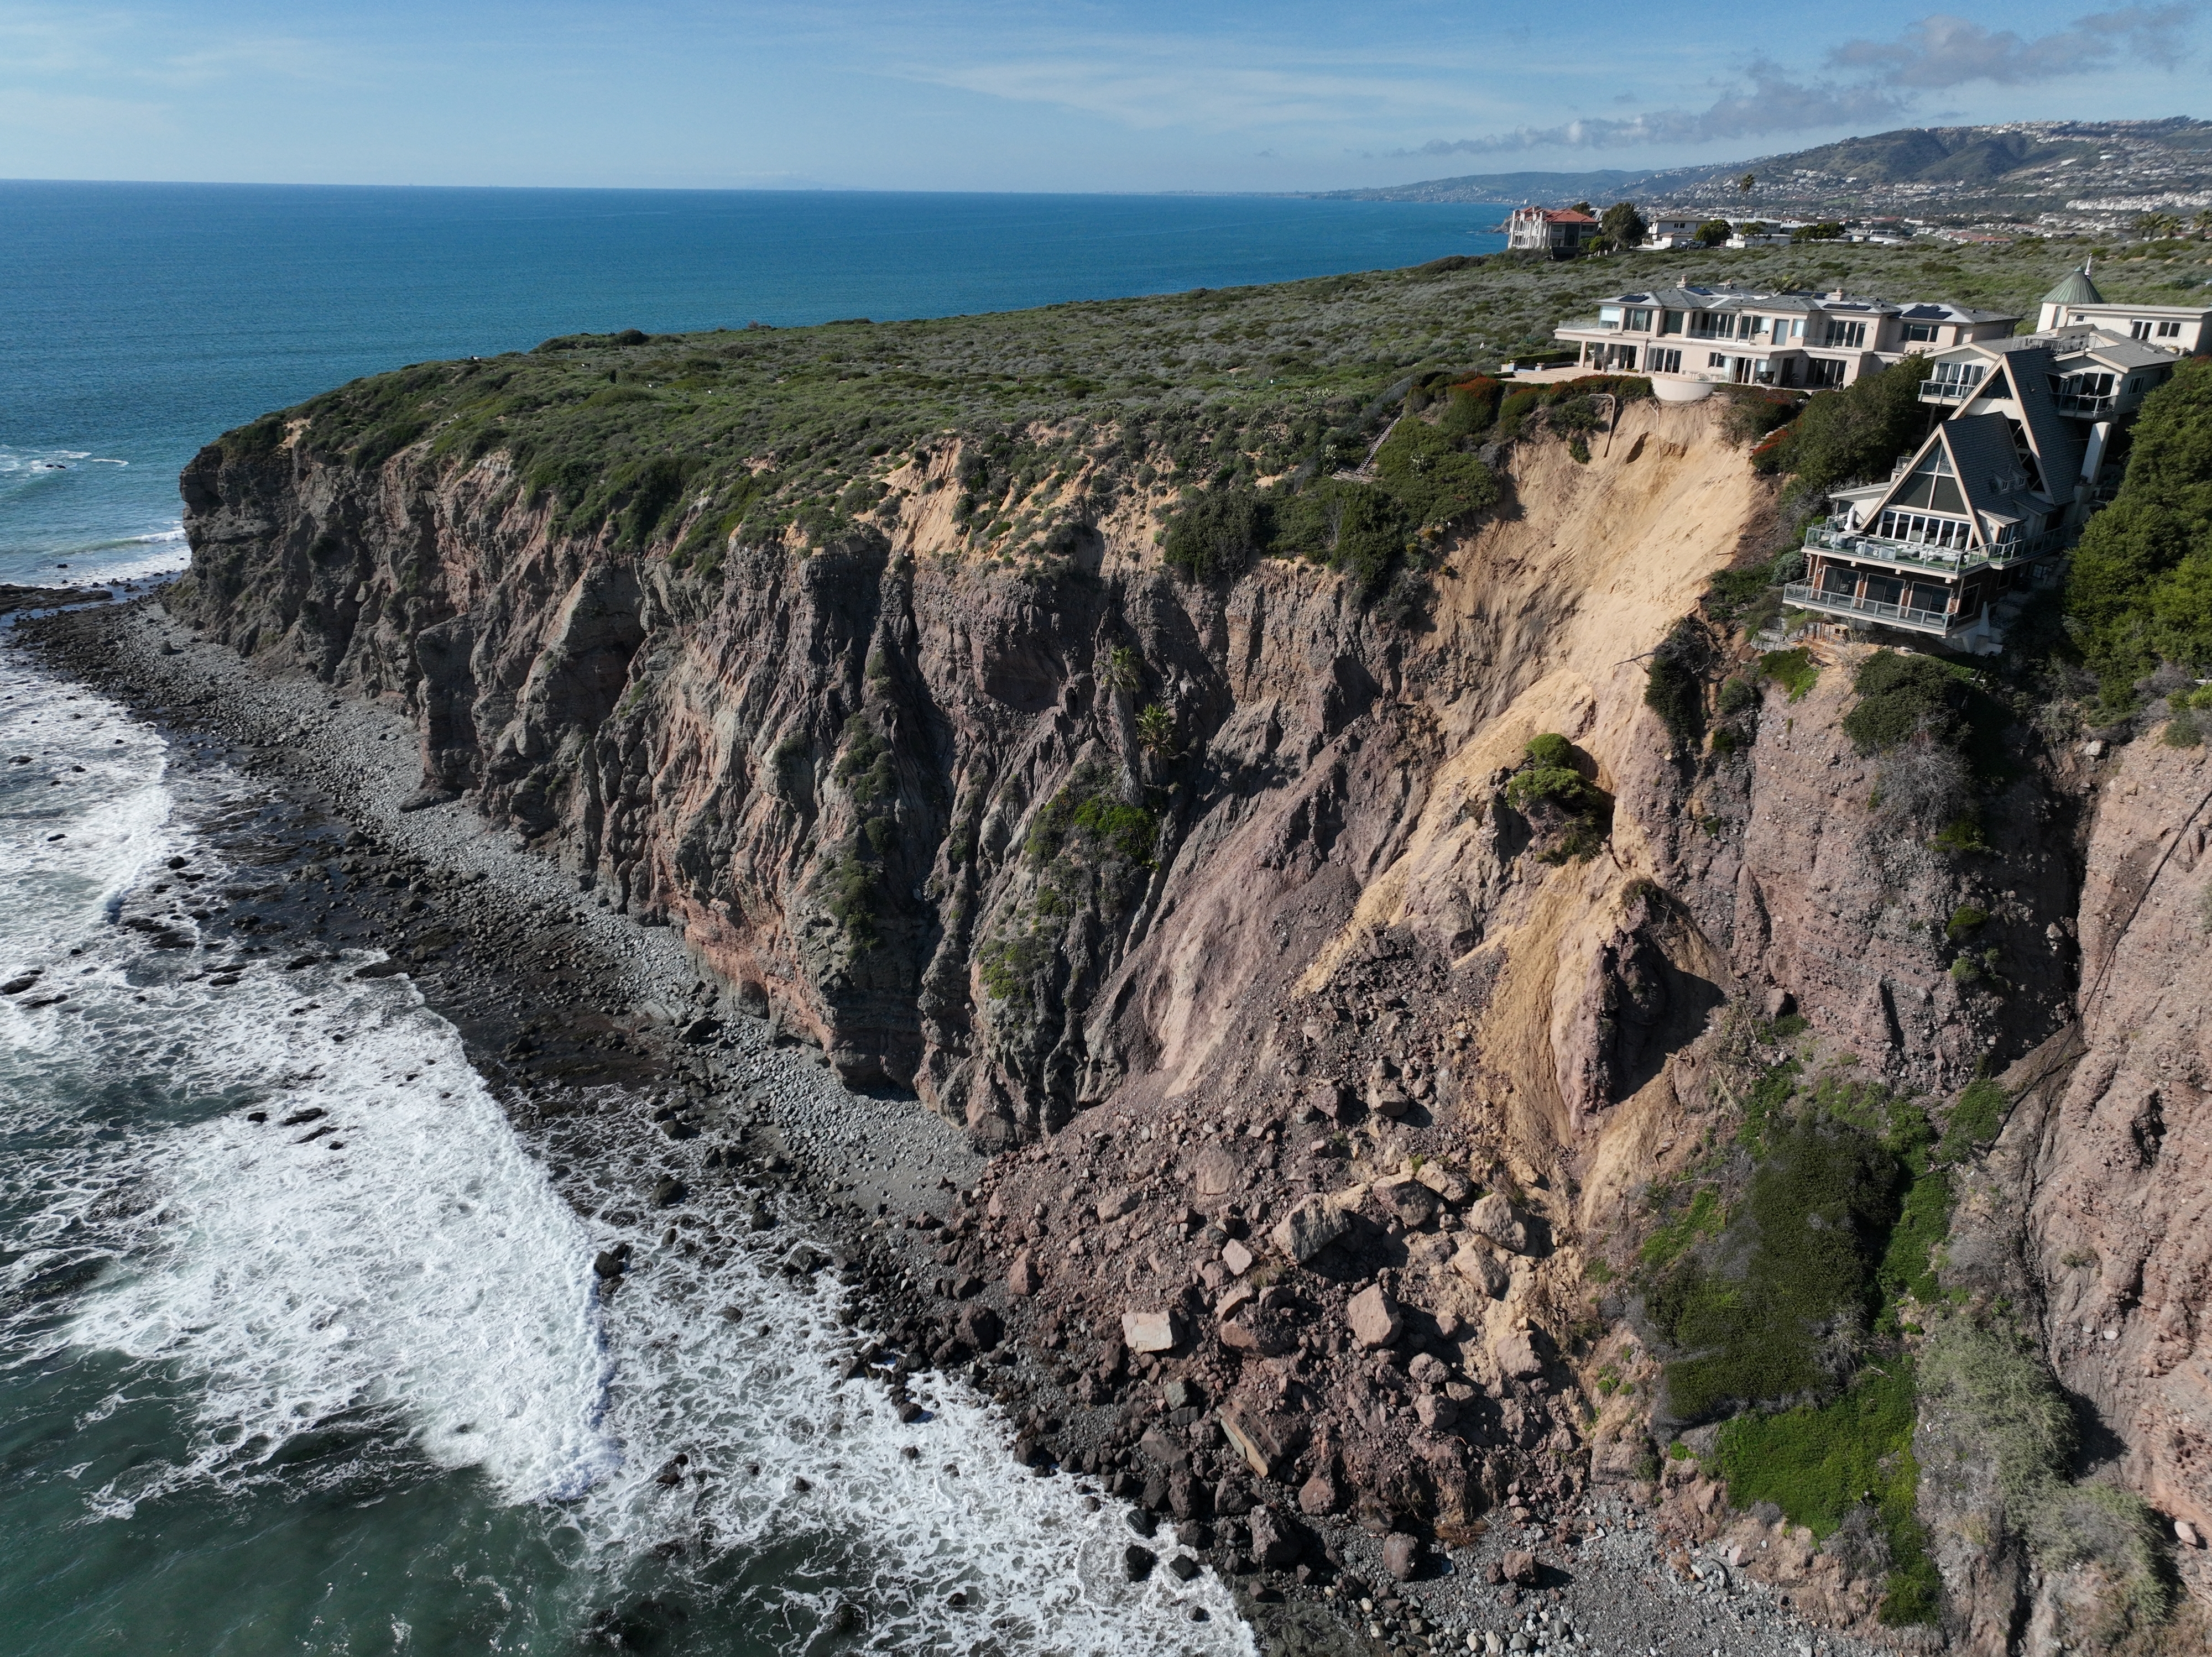 Coastal cliffside with houses perched on the edge overlooking the ocean waves below